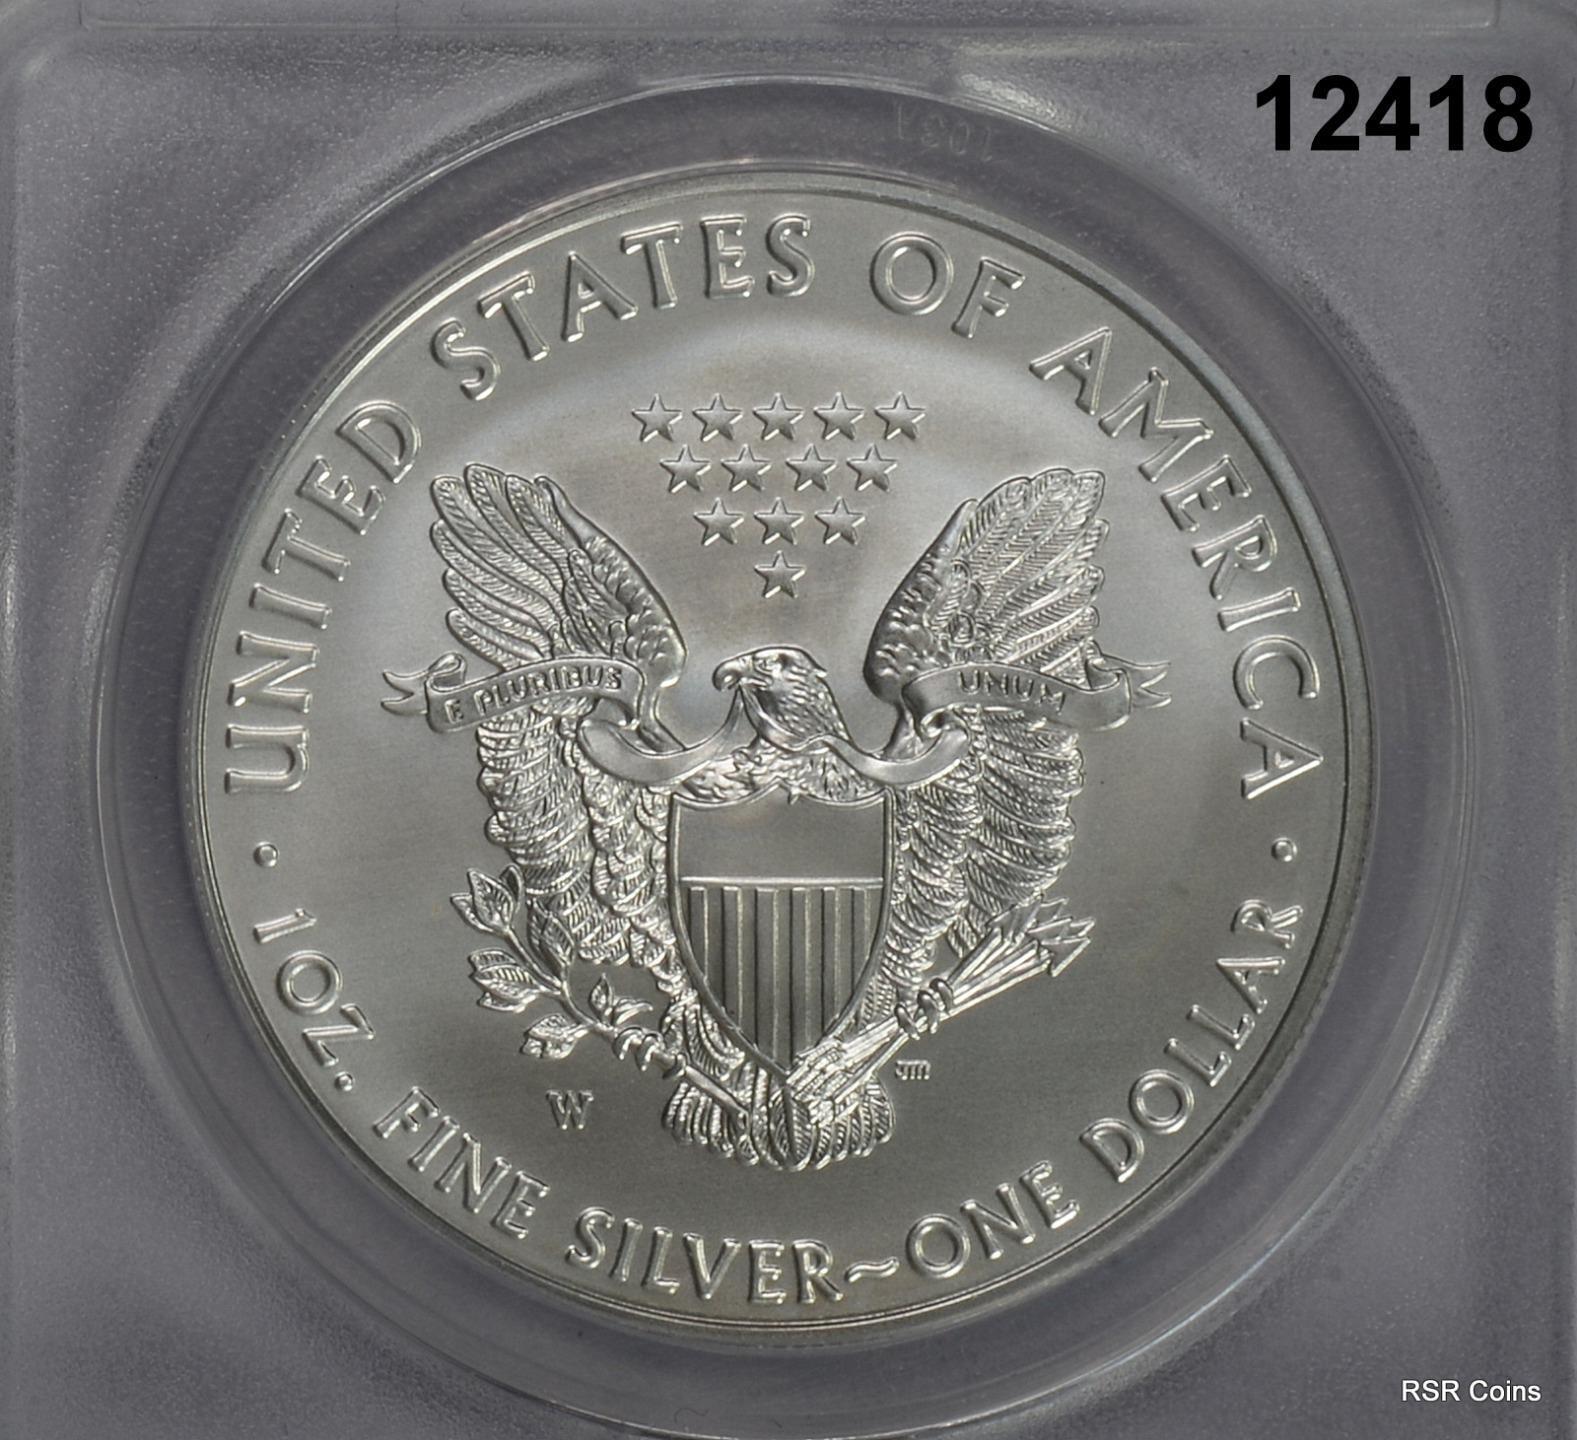 2019 W BURNISHED SILVER EAGLE ANACS CERTIFIED SP70 PERFECTION!! #12418